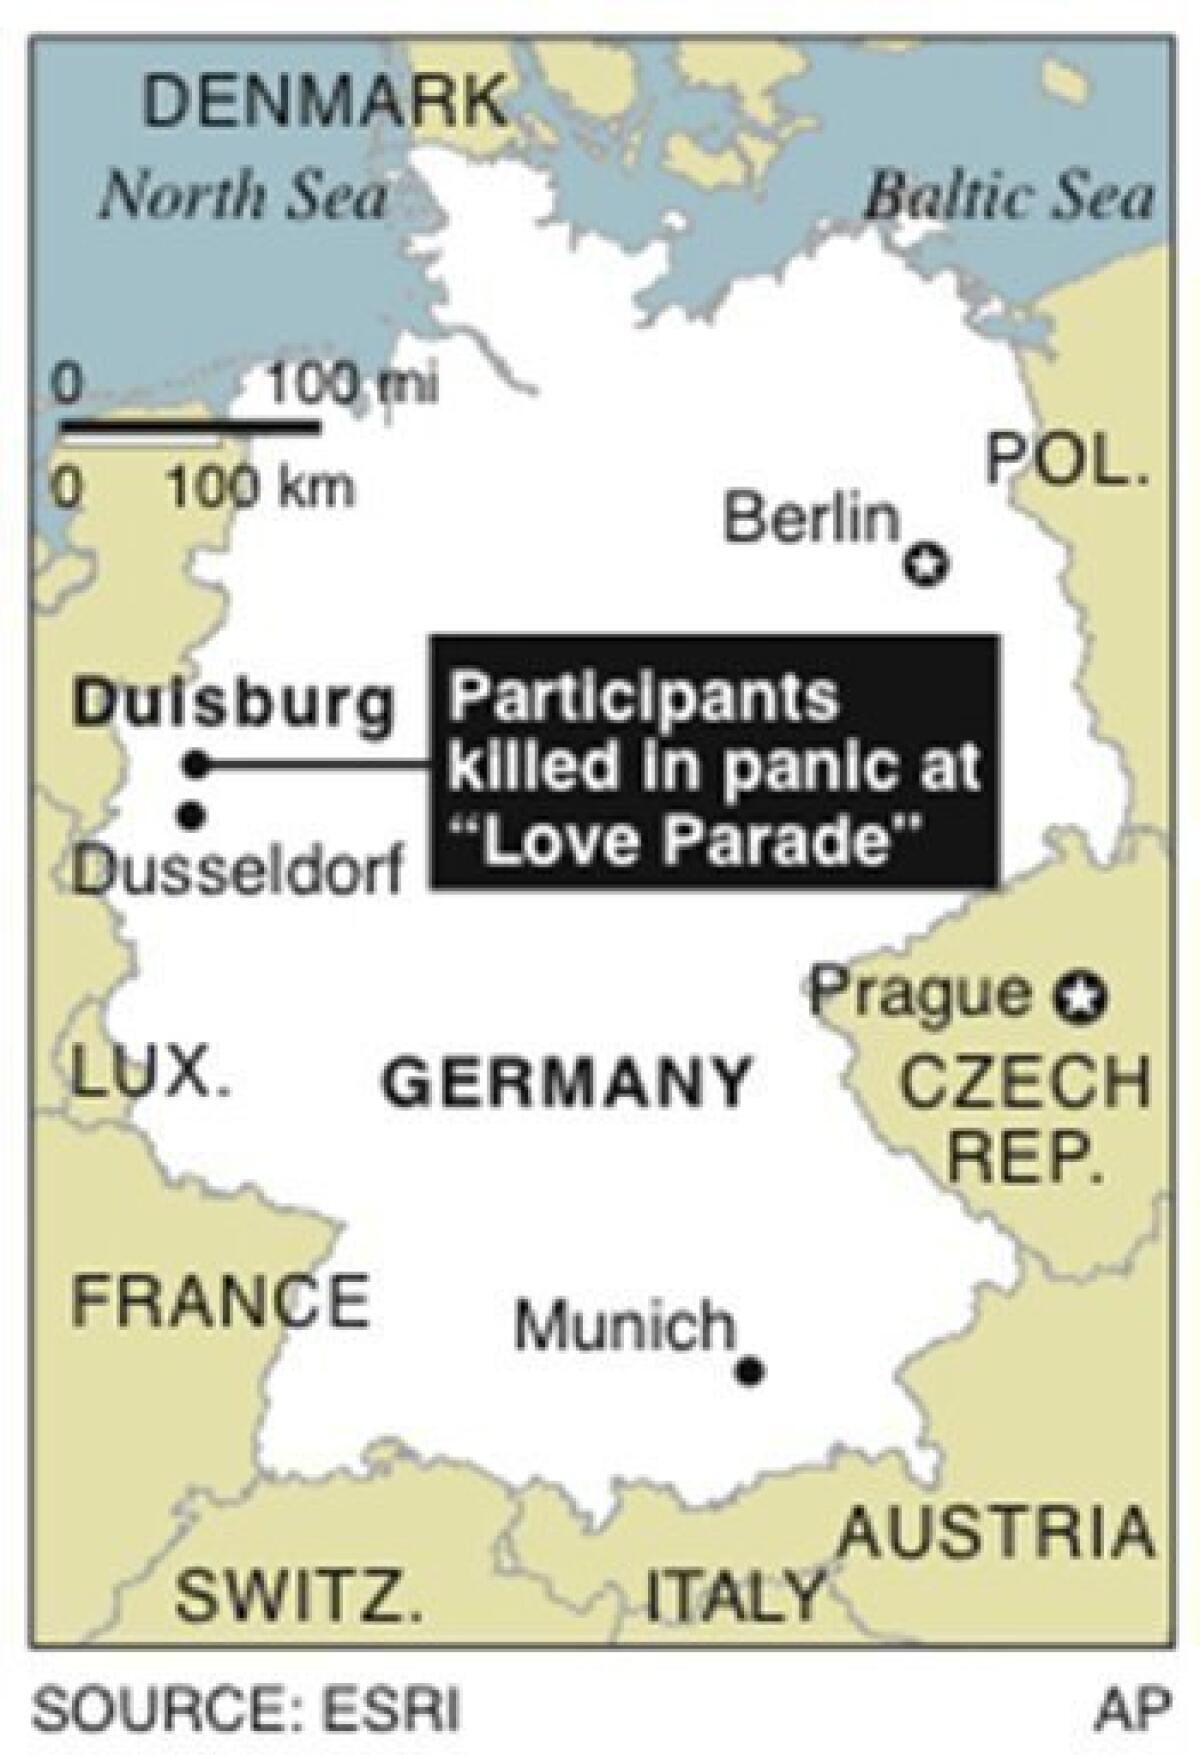 Map locates Duisburg, Germany where a number of participants in the â€œLove Paradeâ€ were injured and killed in a panic